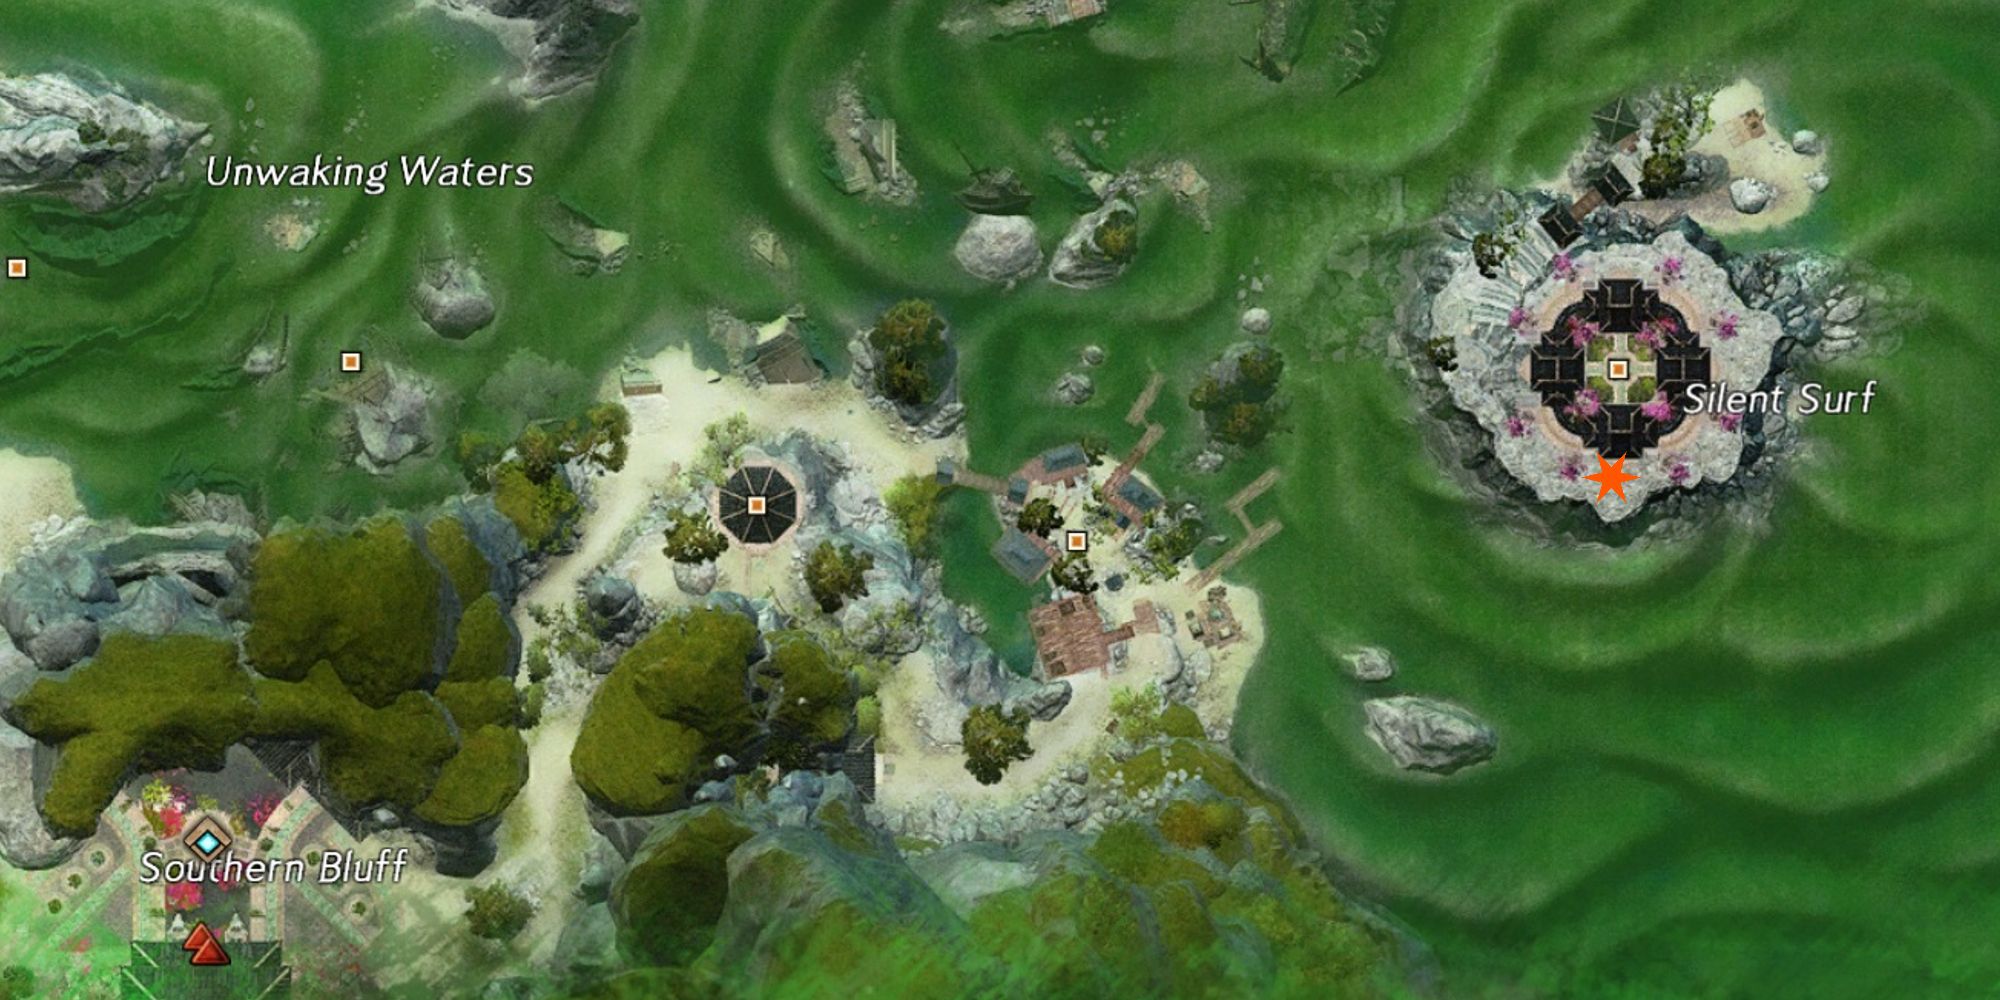 dragons end map with silent surf marjory location highlighted